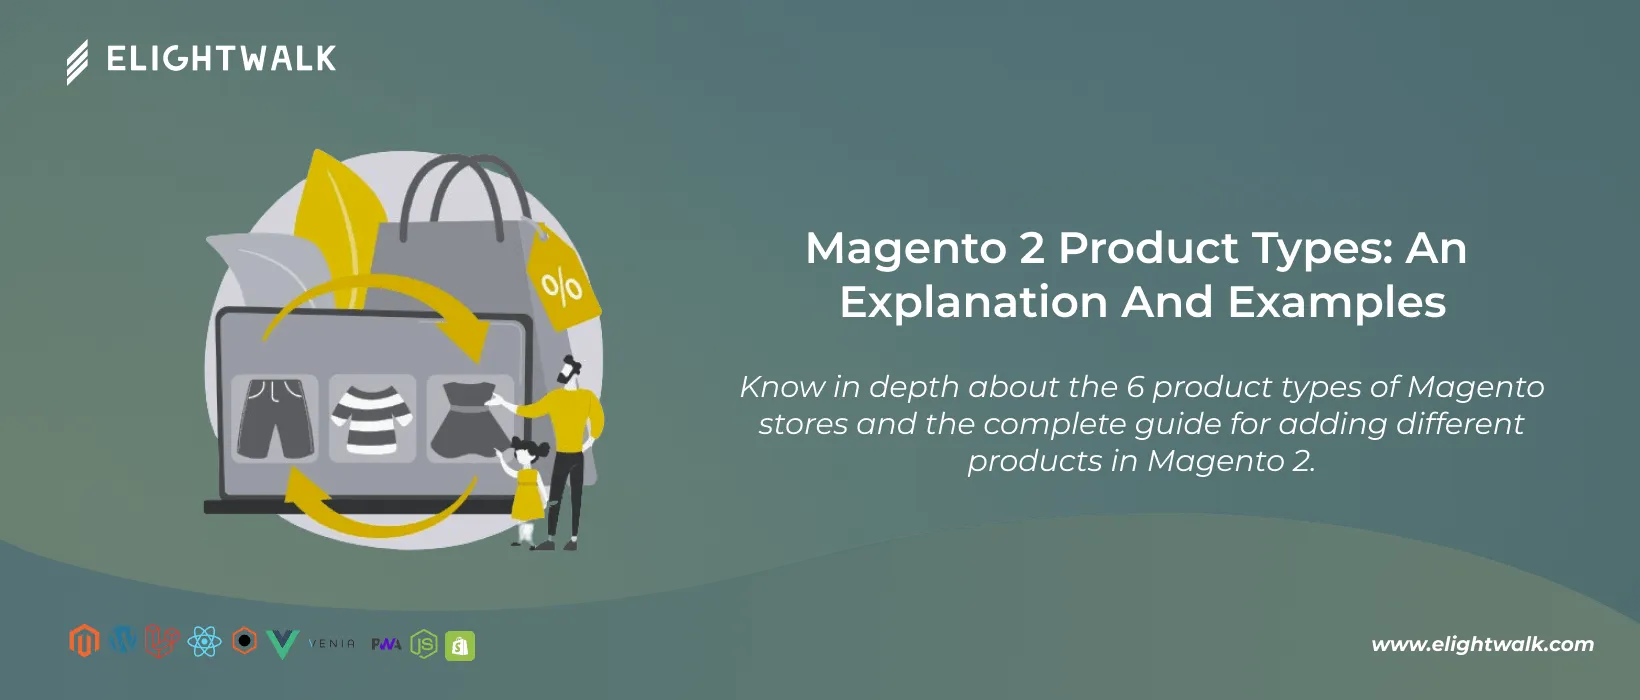 Magento 2 Product types